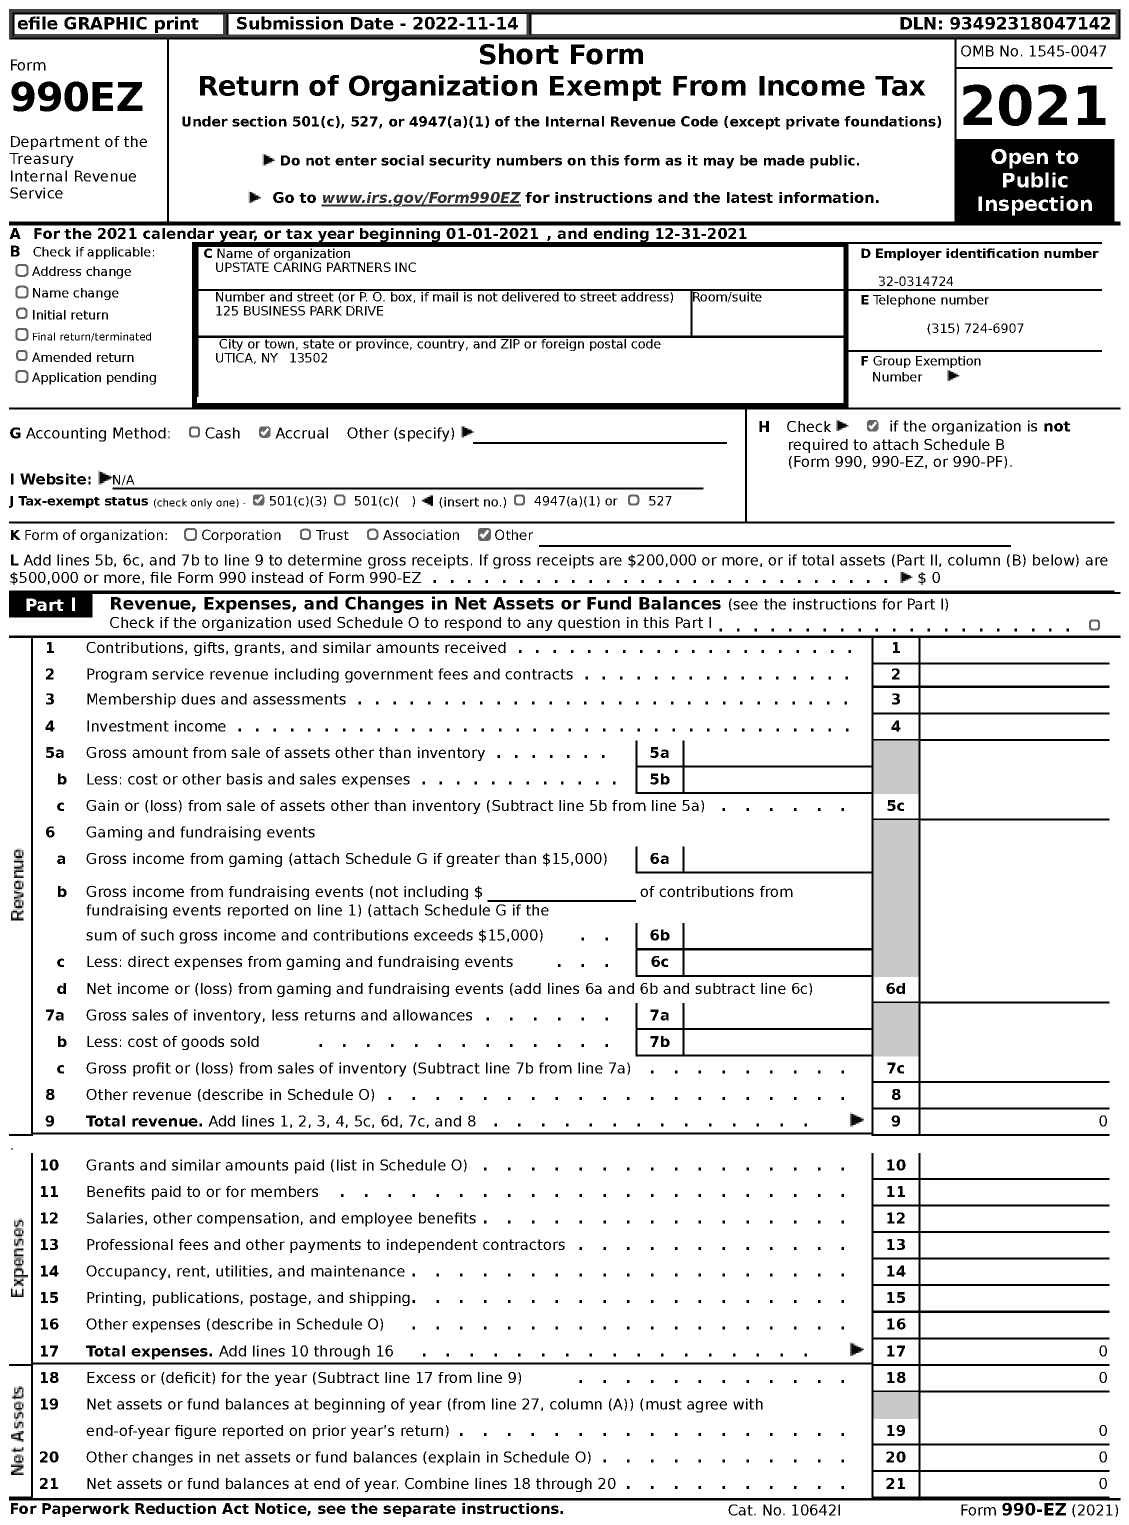 Image of first page of 2021 Form 990EZ for Upstate Caring Partners Holding Company